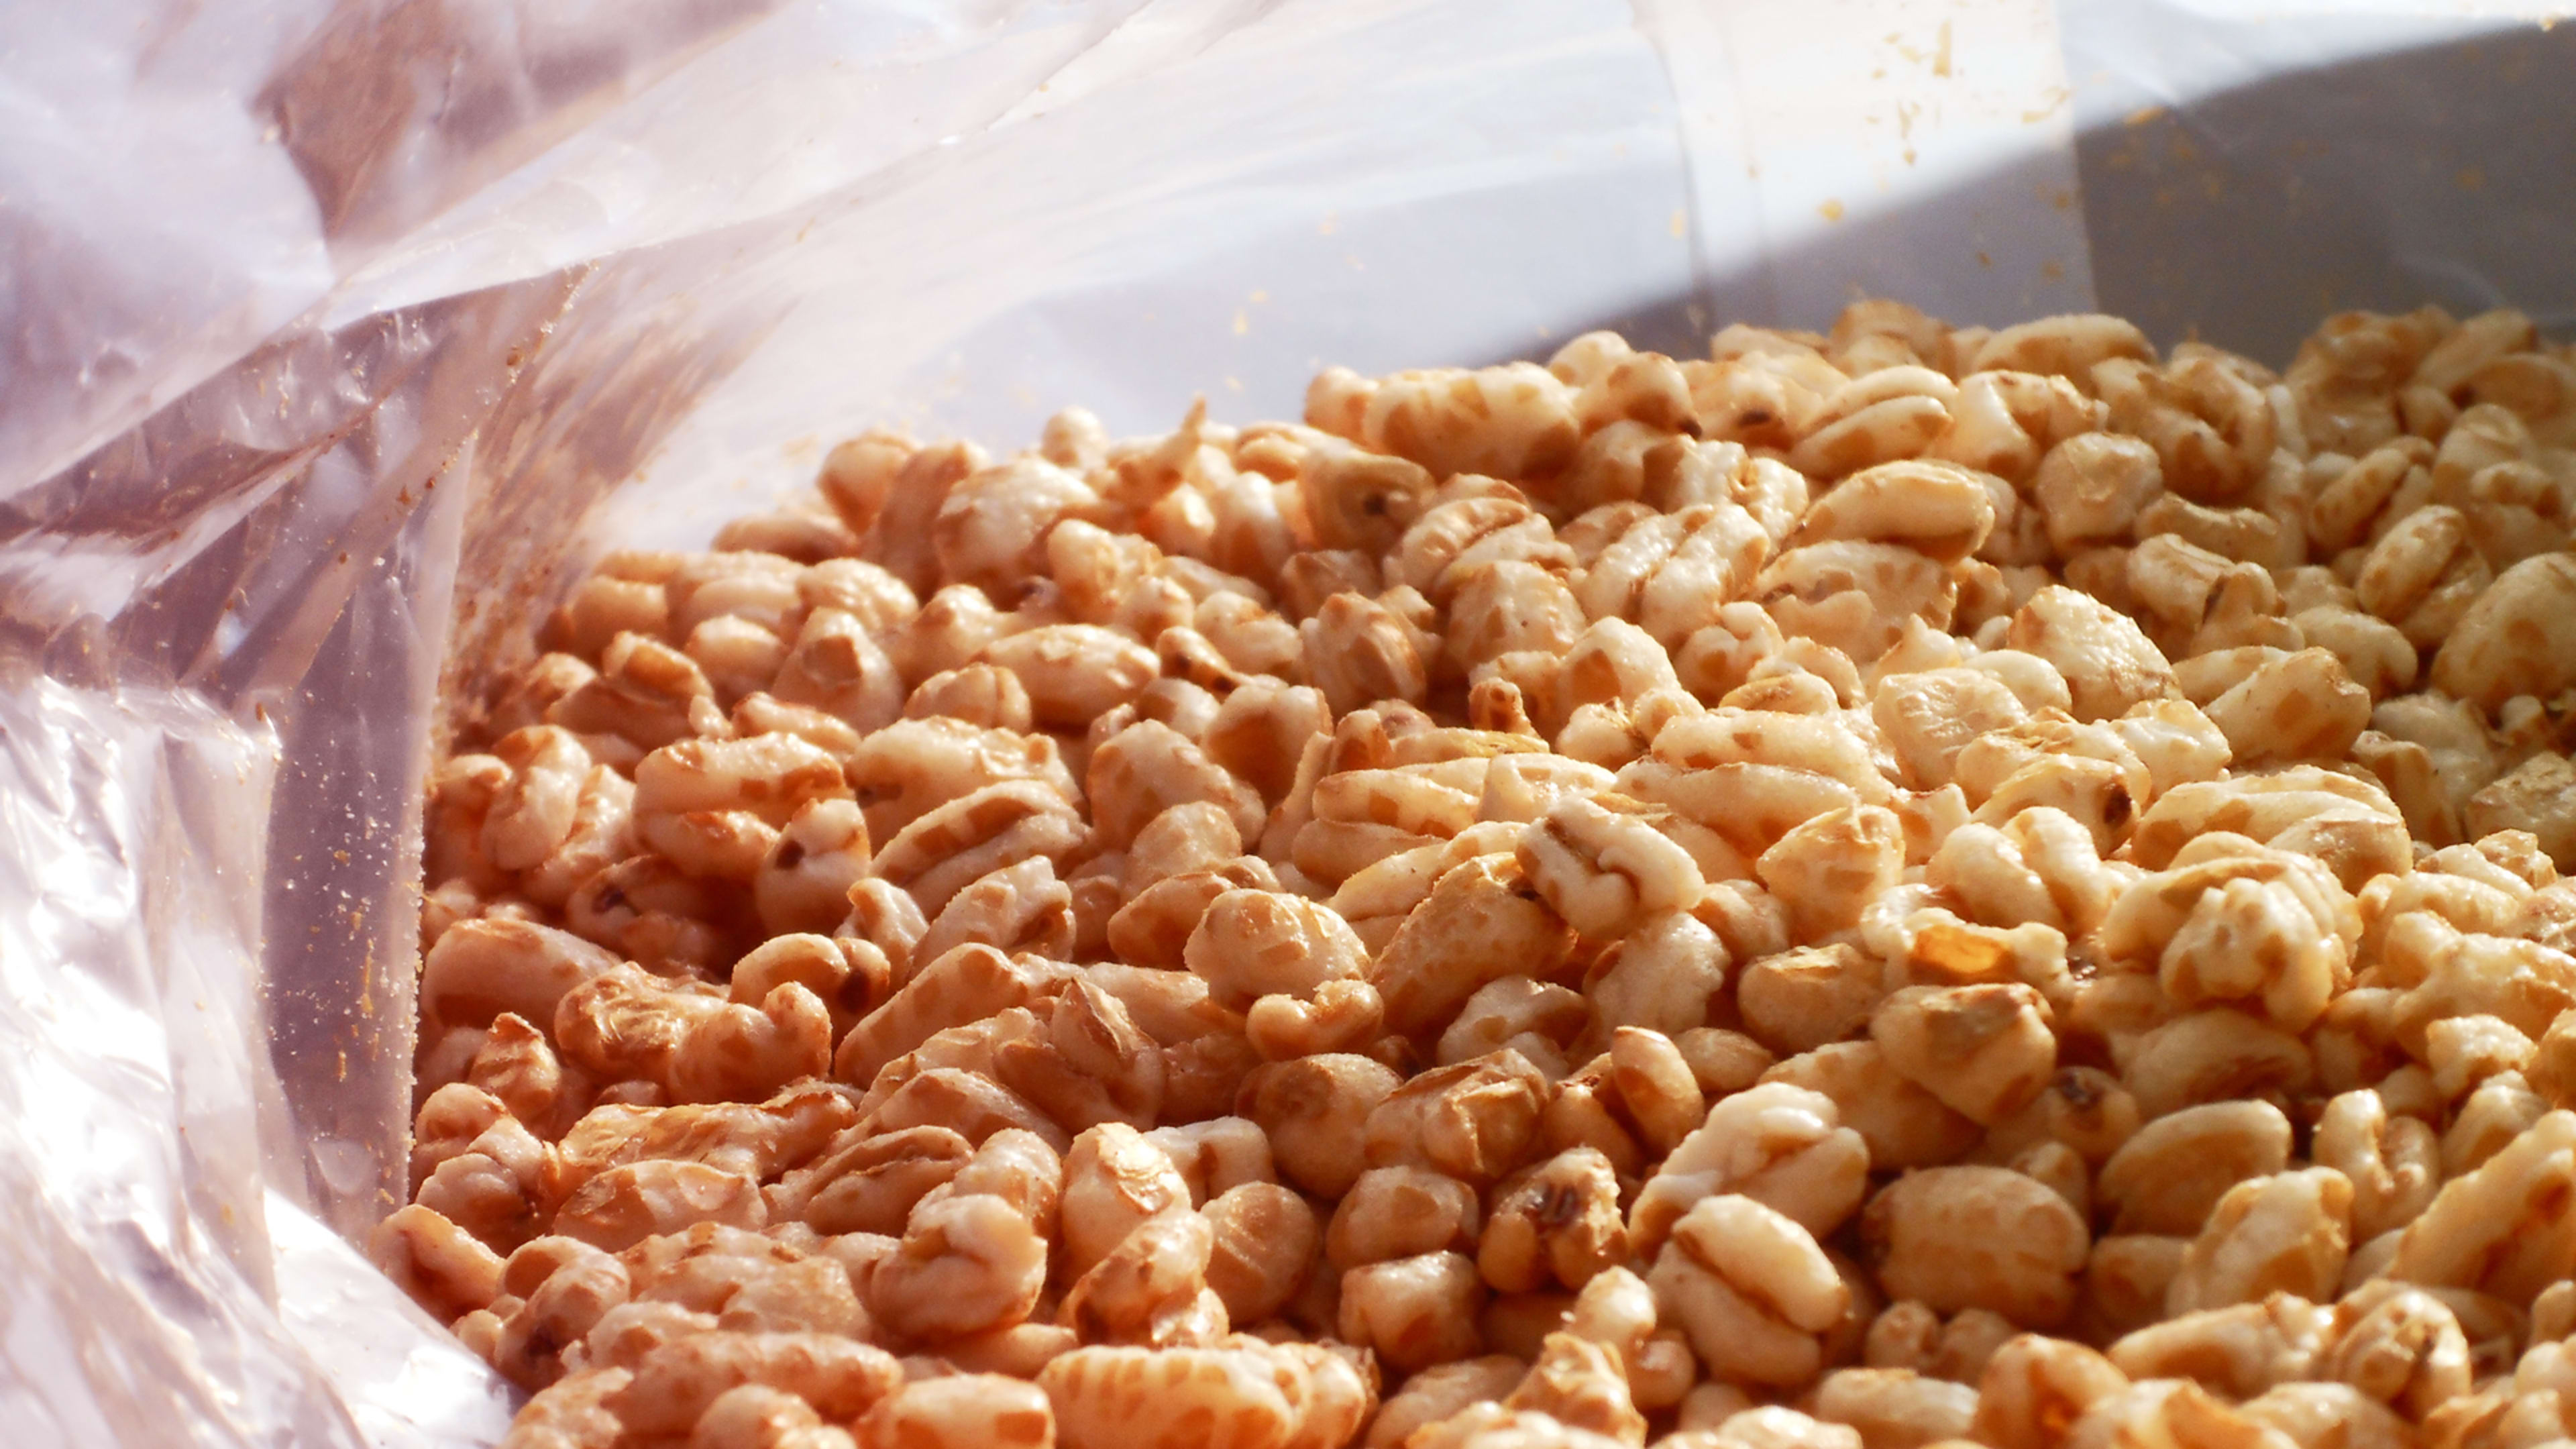 Kellogg’s Honey Smacks Salmonella outbreak: 6 things the CDC says you need to know